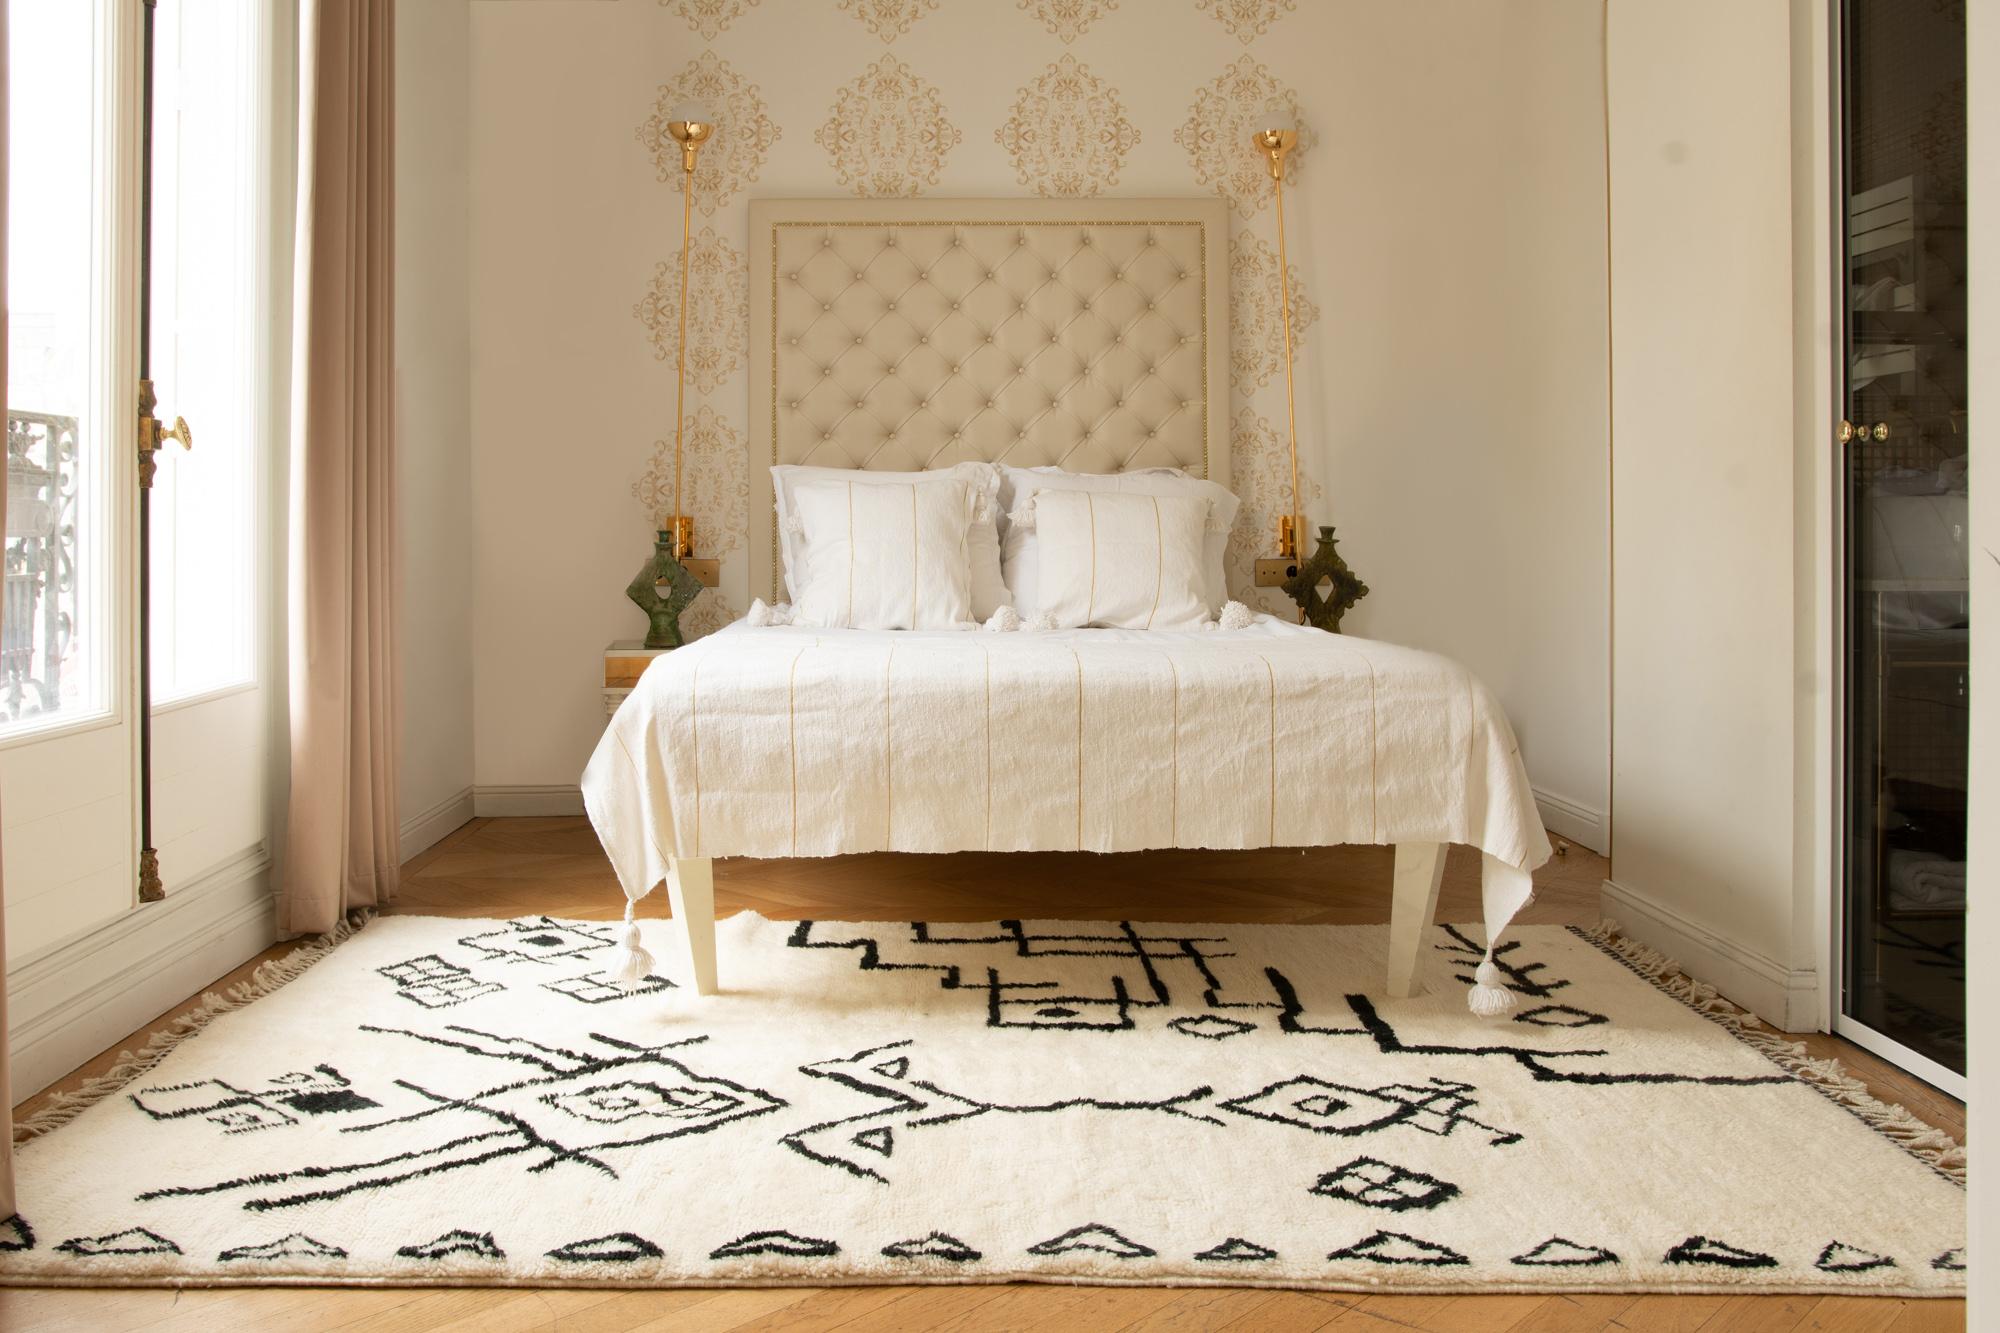 Name of the rug : 